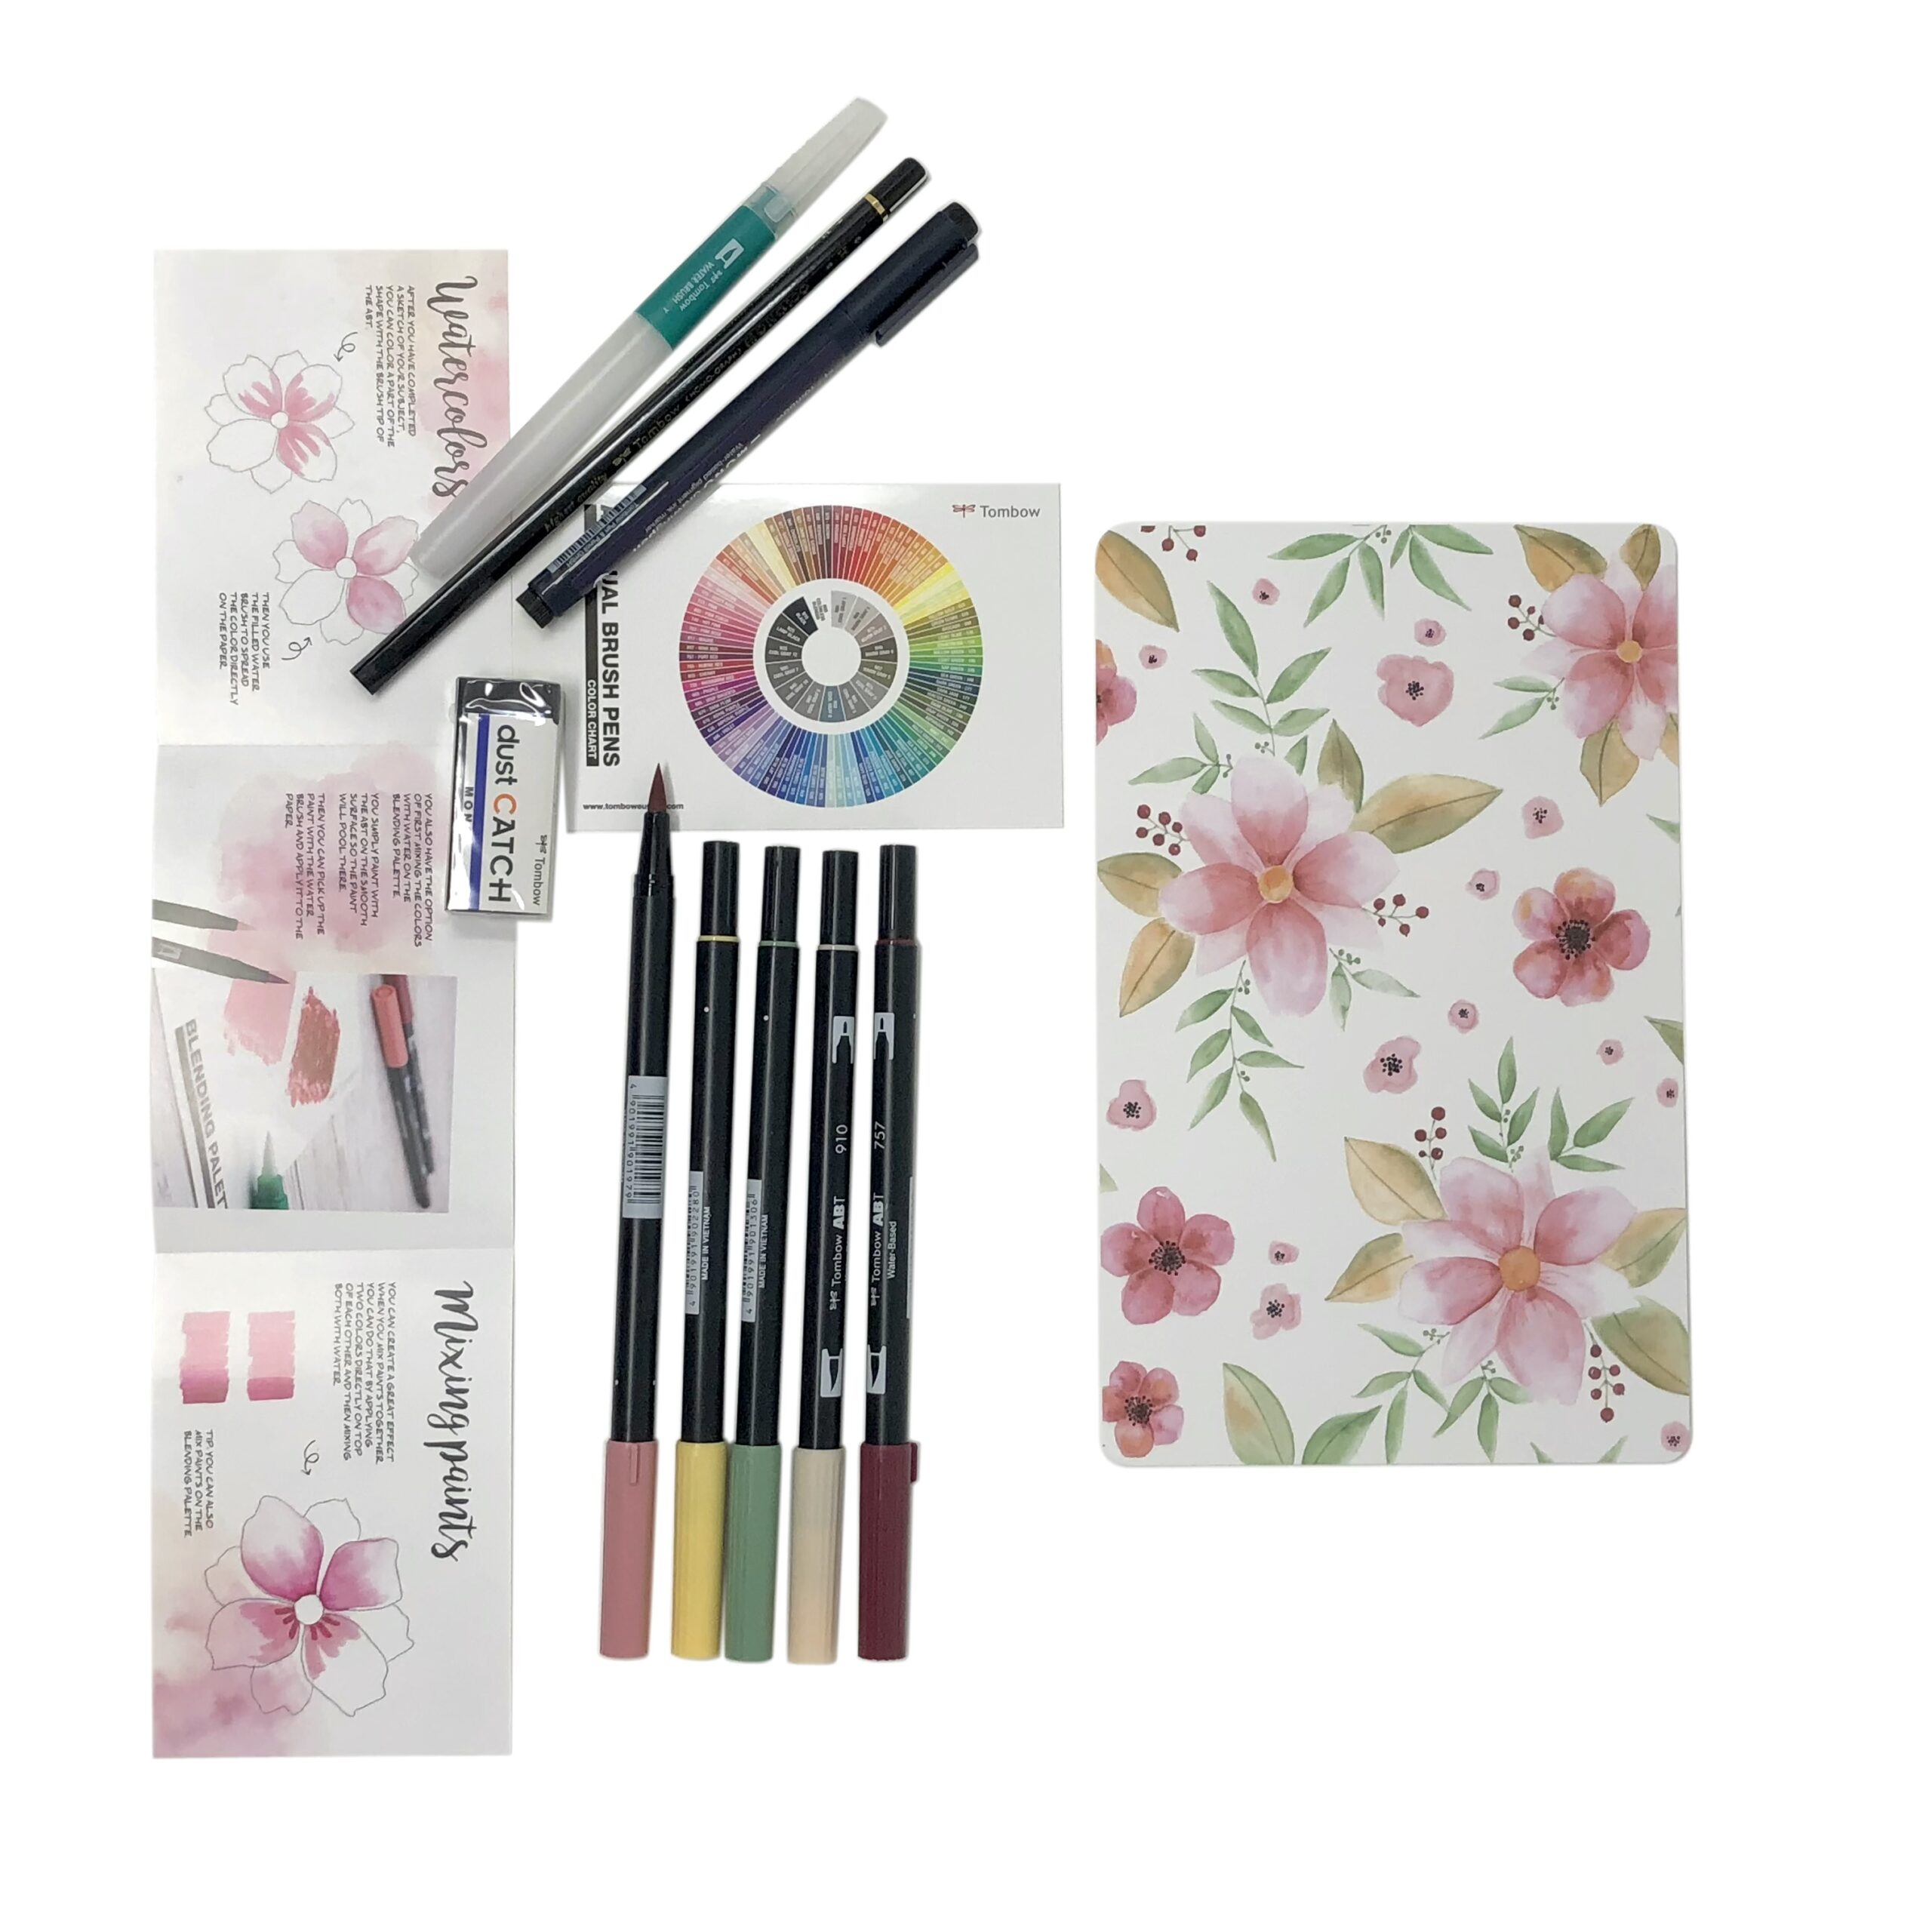 Tombow Watercoloring set Floral